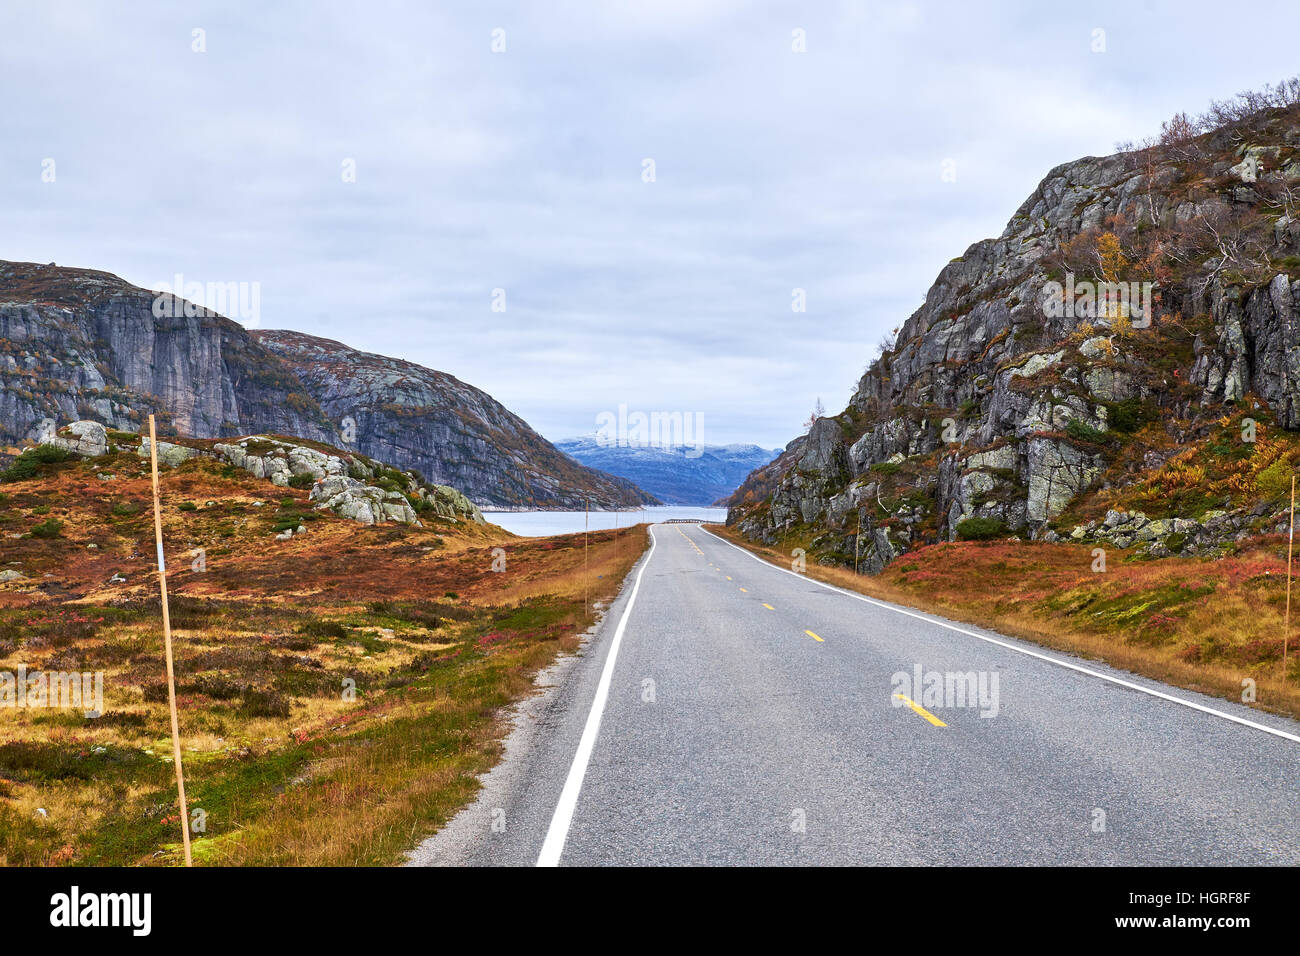 The road on route 45 in Rogaland, Norway, turns right along a tarn between the fells Stock Photo